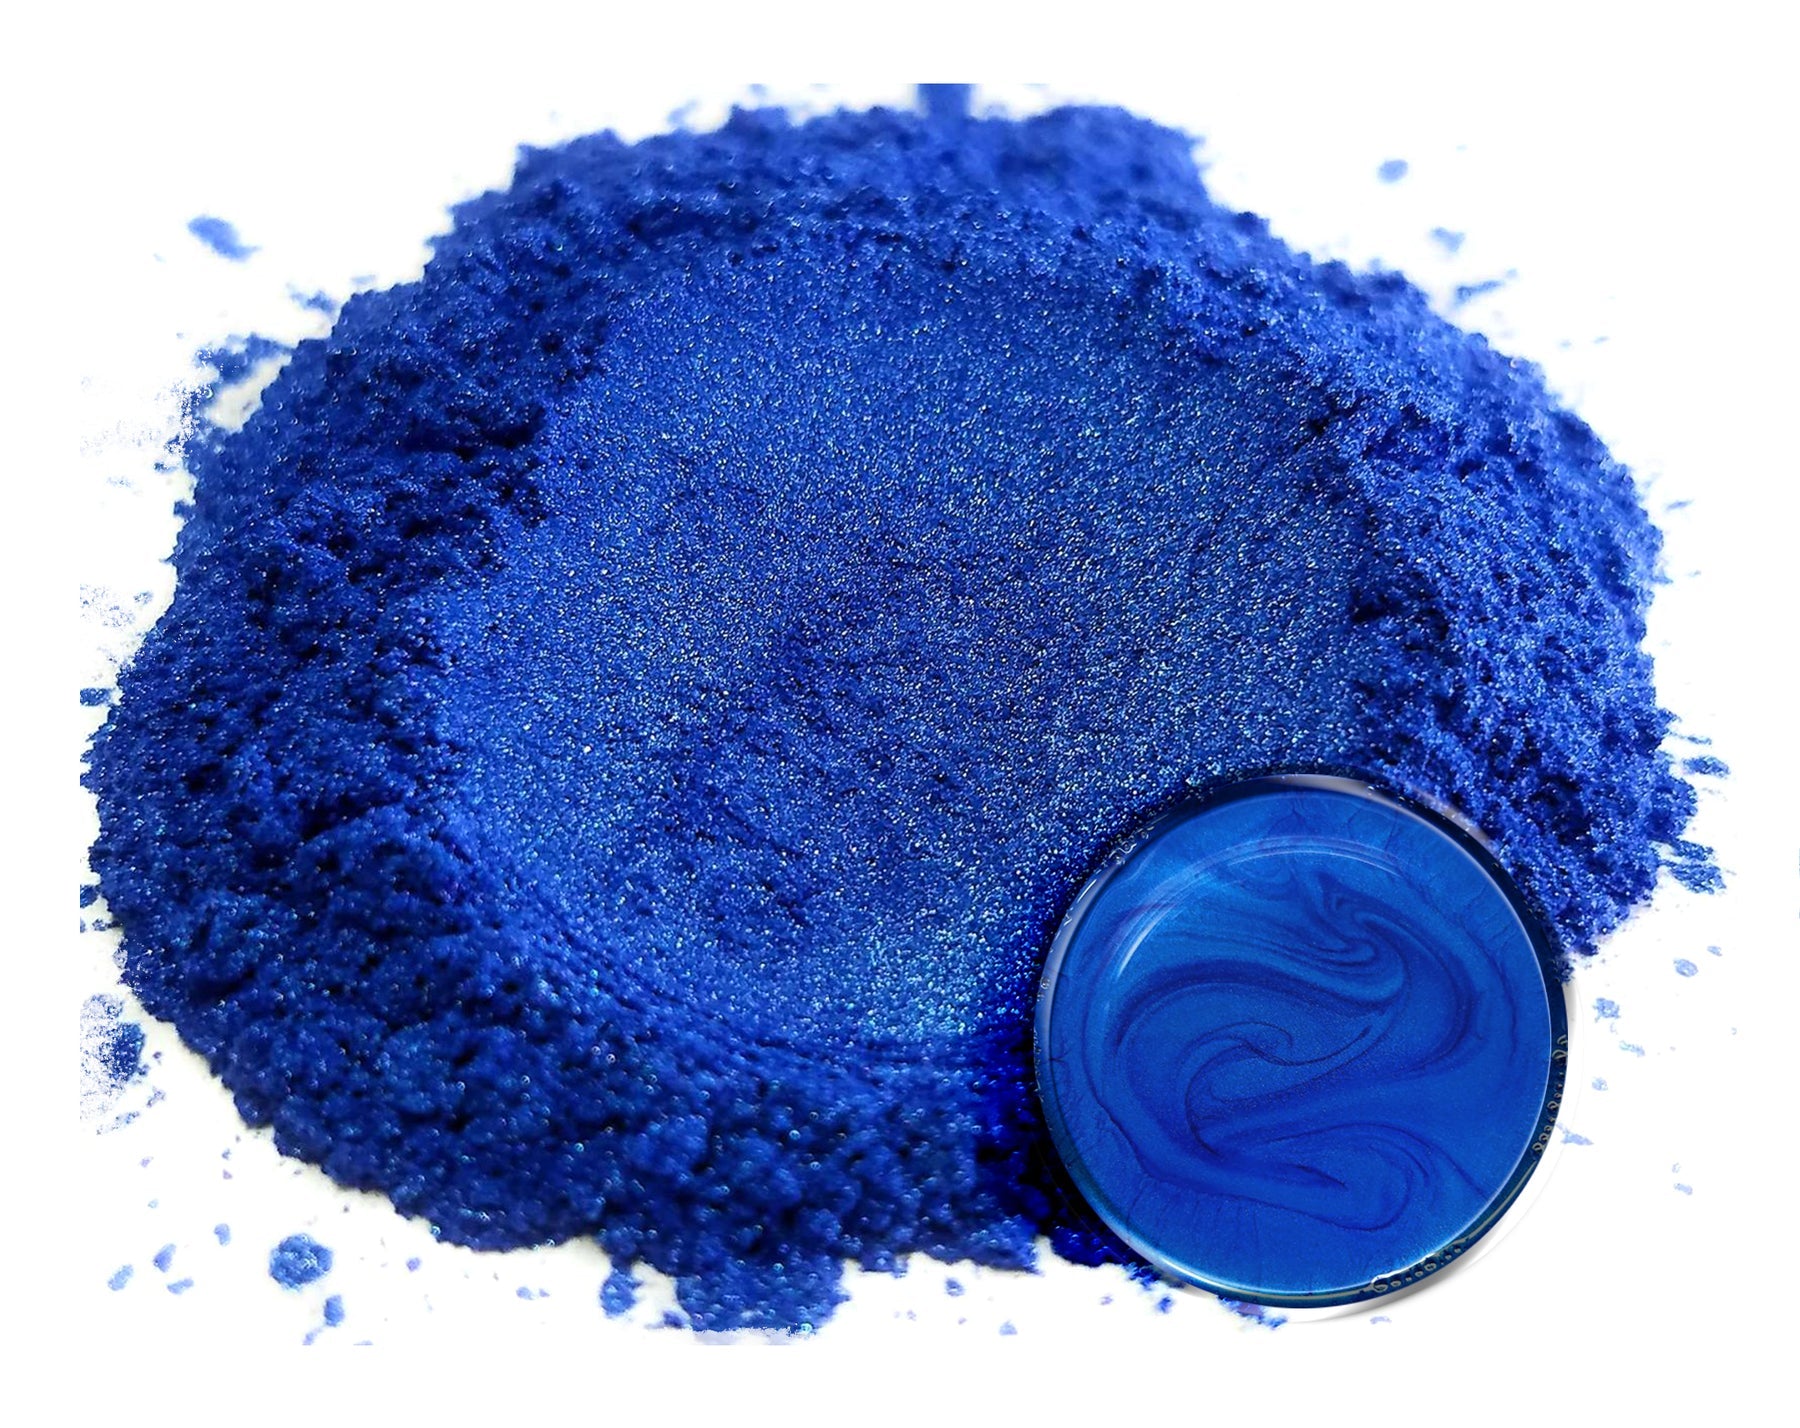 Powdered pigment by eye candy pigments for epoxy resin projects. In the color Pacific Blue.